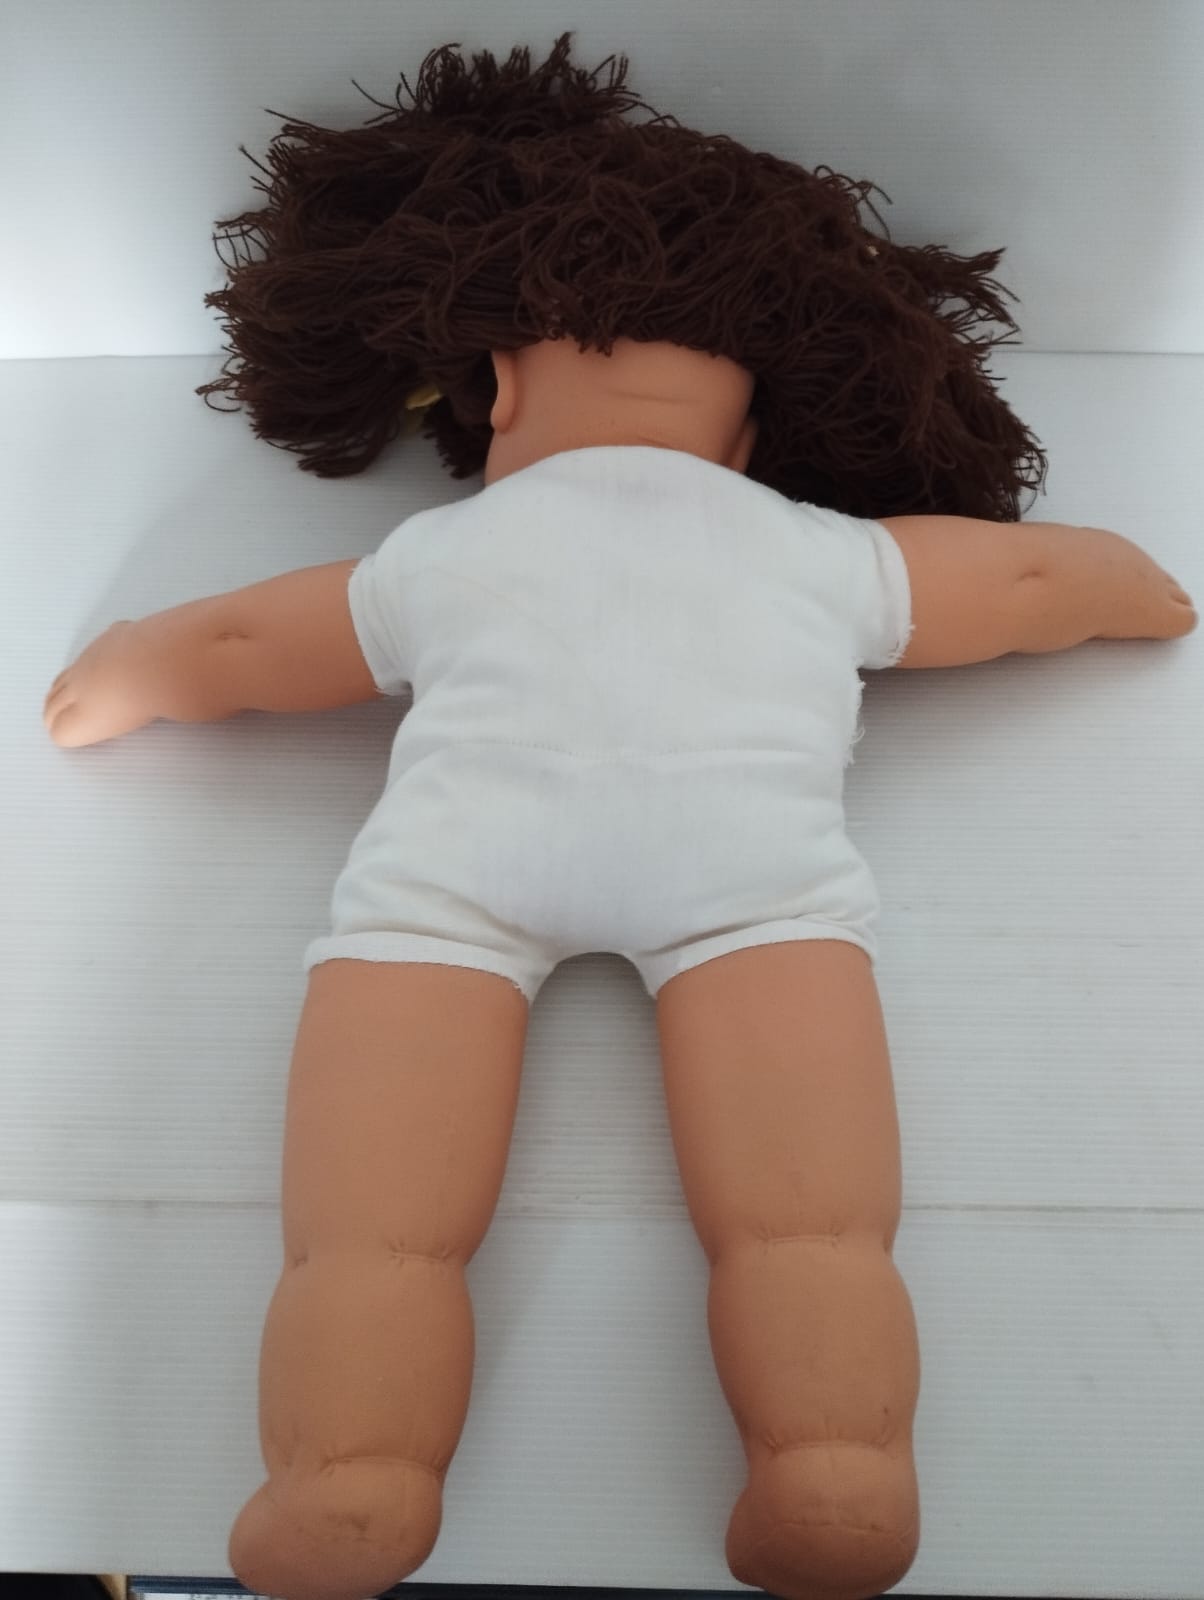 Furga doll from the Andrea and Poldina series, original from the 80s